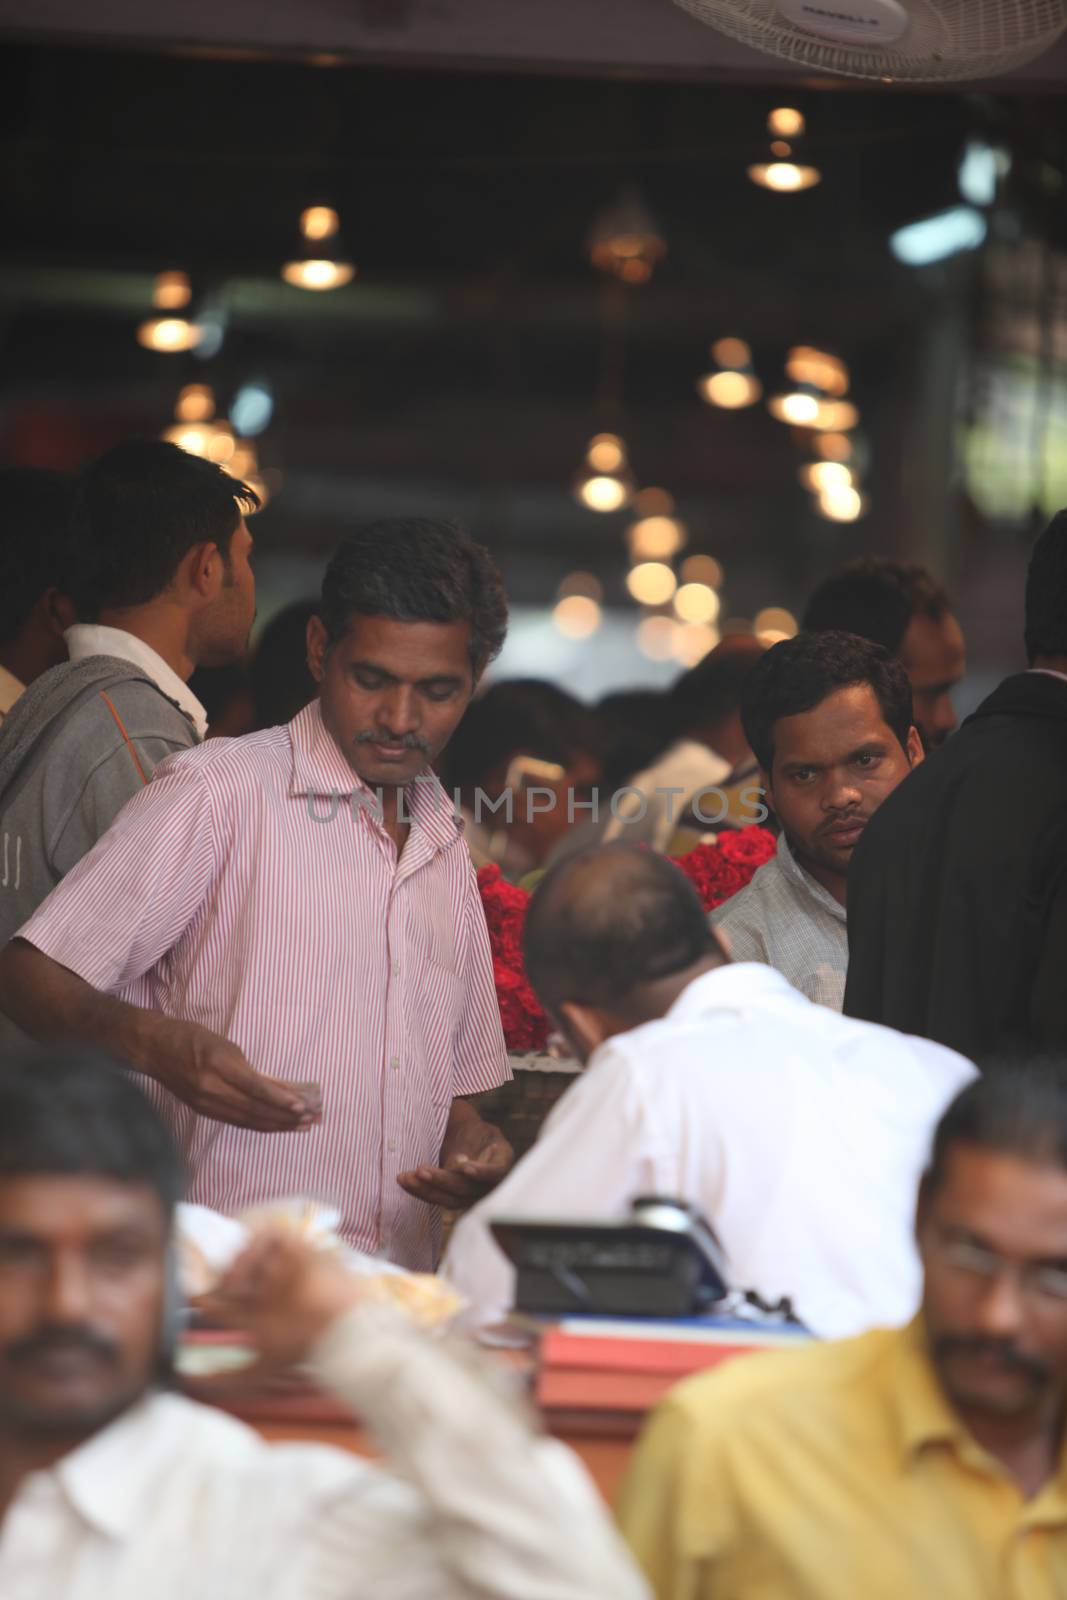 Pune, India - October 21, 2015: People crowded at a flower market during Indian festival Dassera.